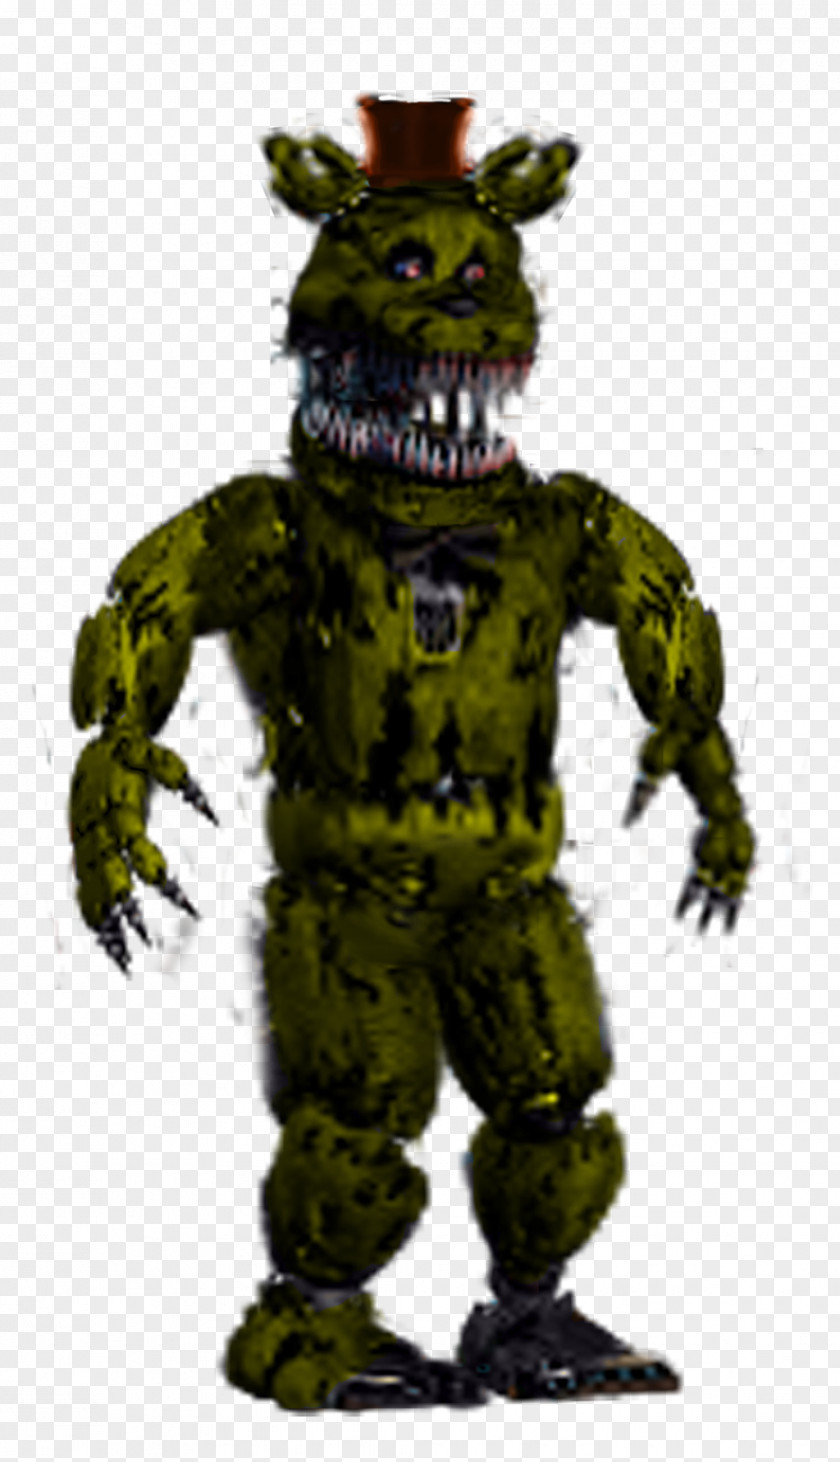 Withered Leaf Five Nights At Freddy's 4 Freddy Fazbear's Pizzeria Simulator Nightmare Photography PNG